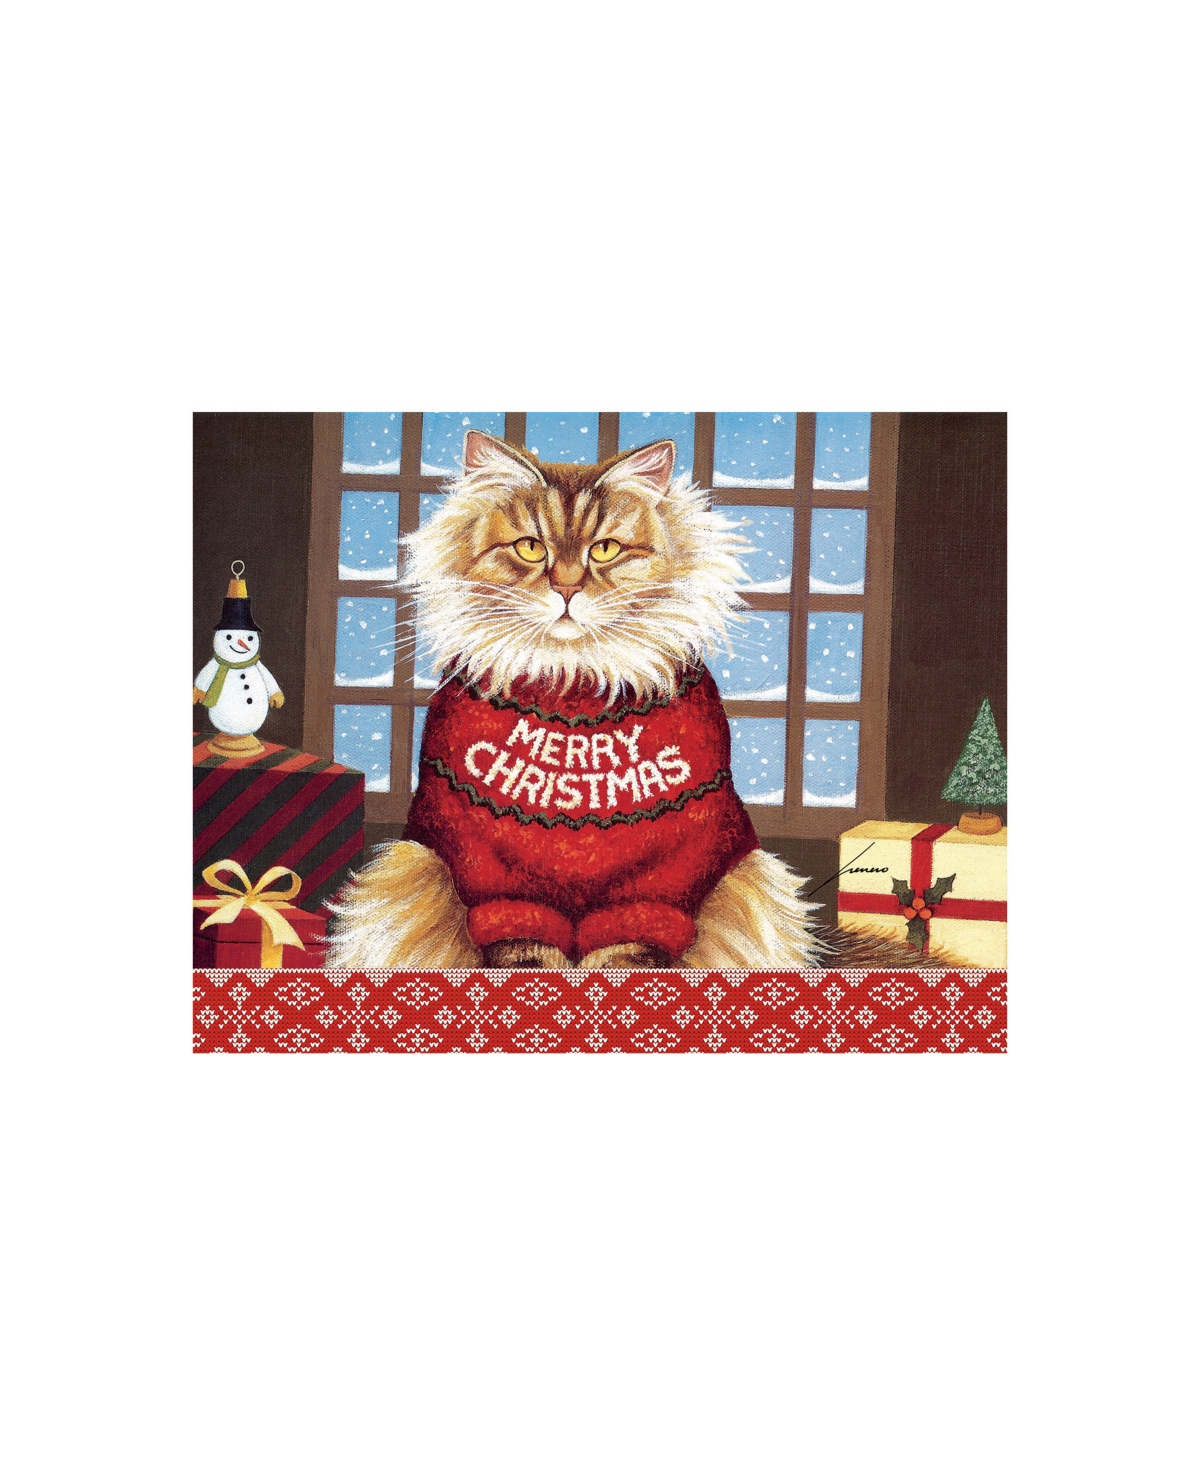 Squeakys Christmas Boxed Christmas Cards - Multi